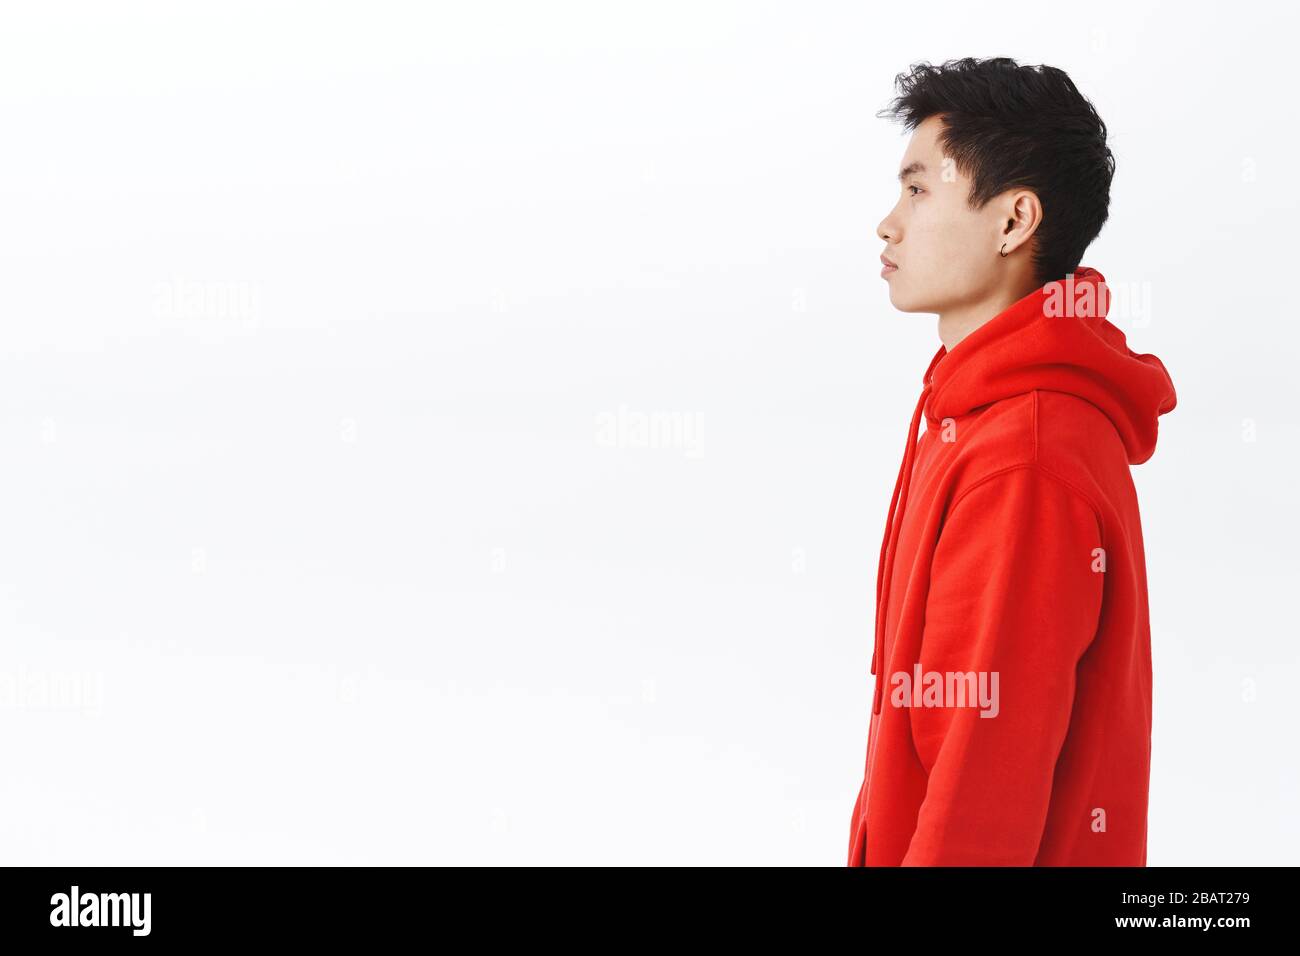 Profile portrait of young asian man in red hoodie looking left with serious, unbothered expression, standing casually over white background, concept Stock Photo